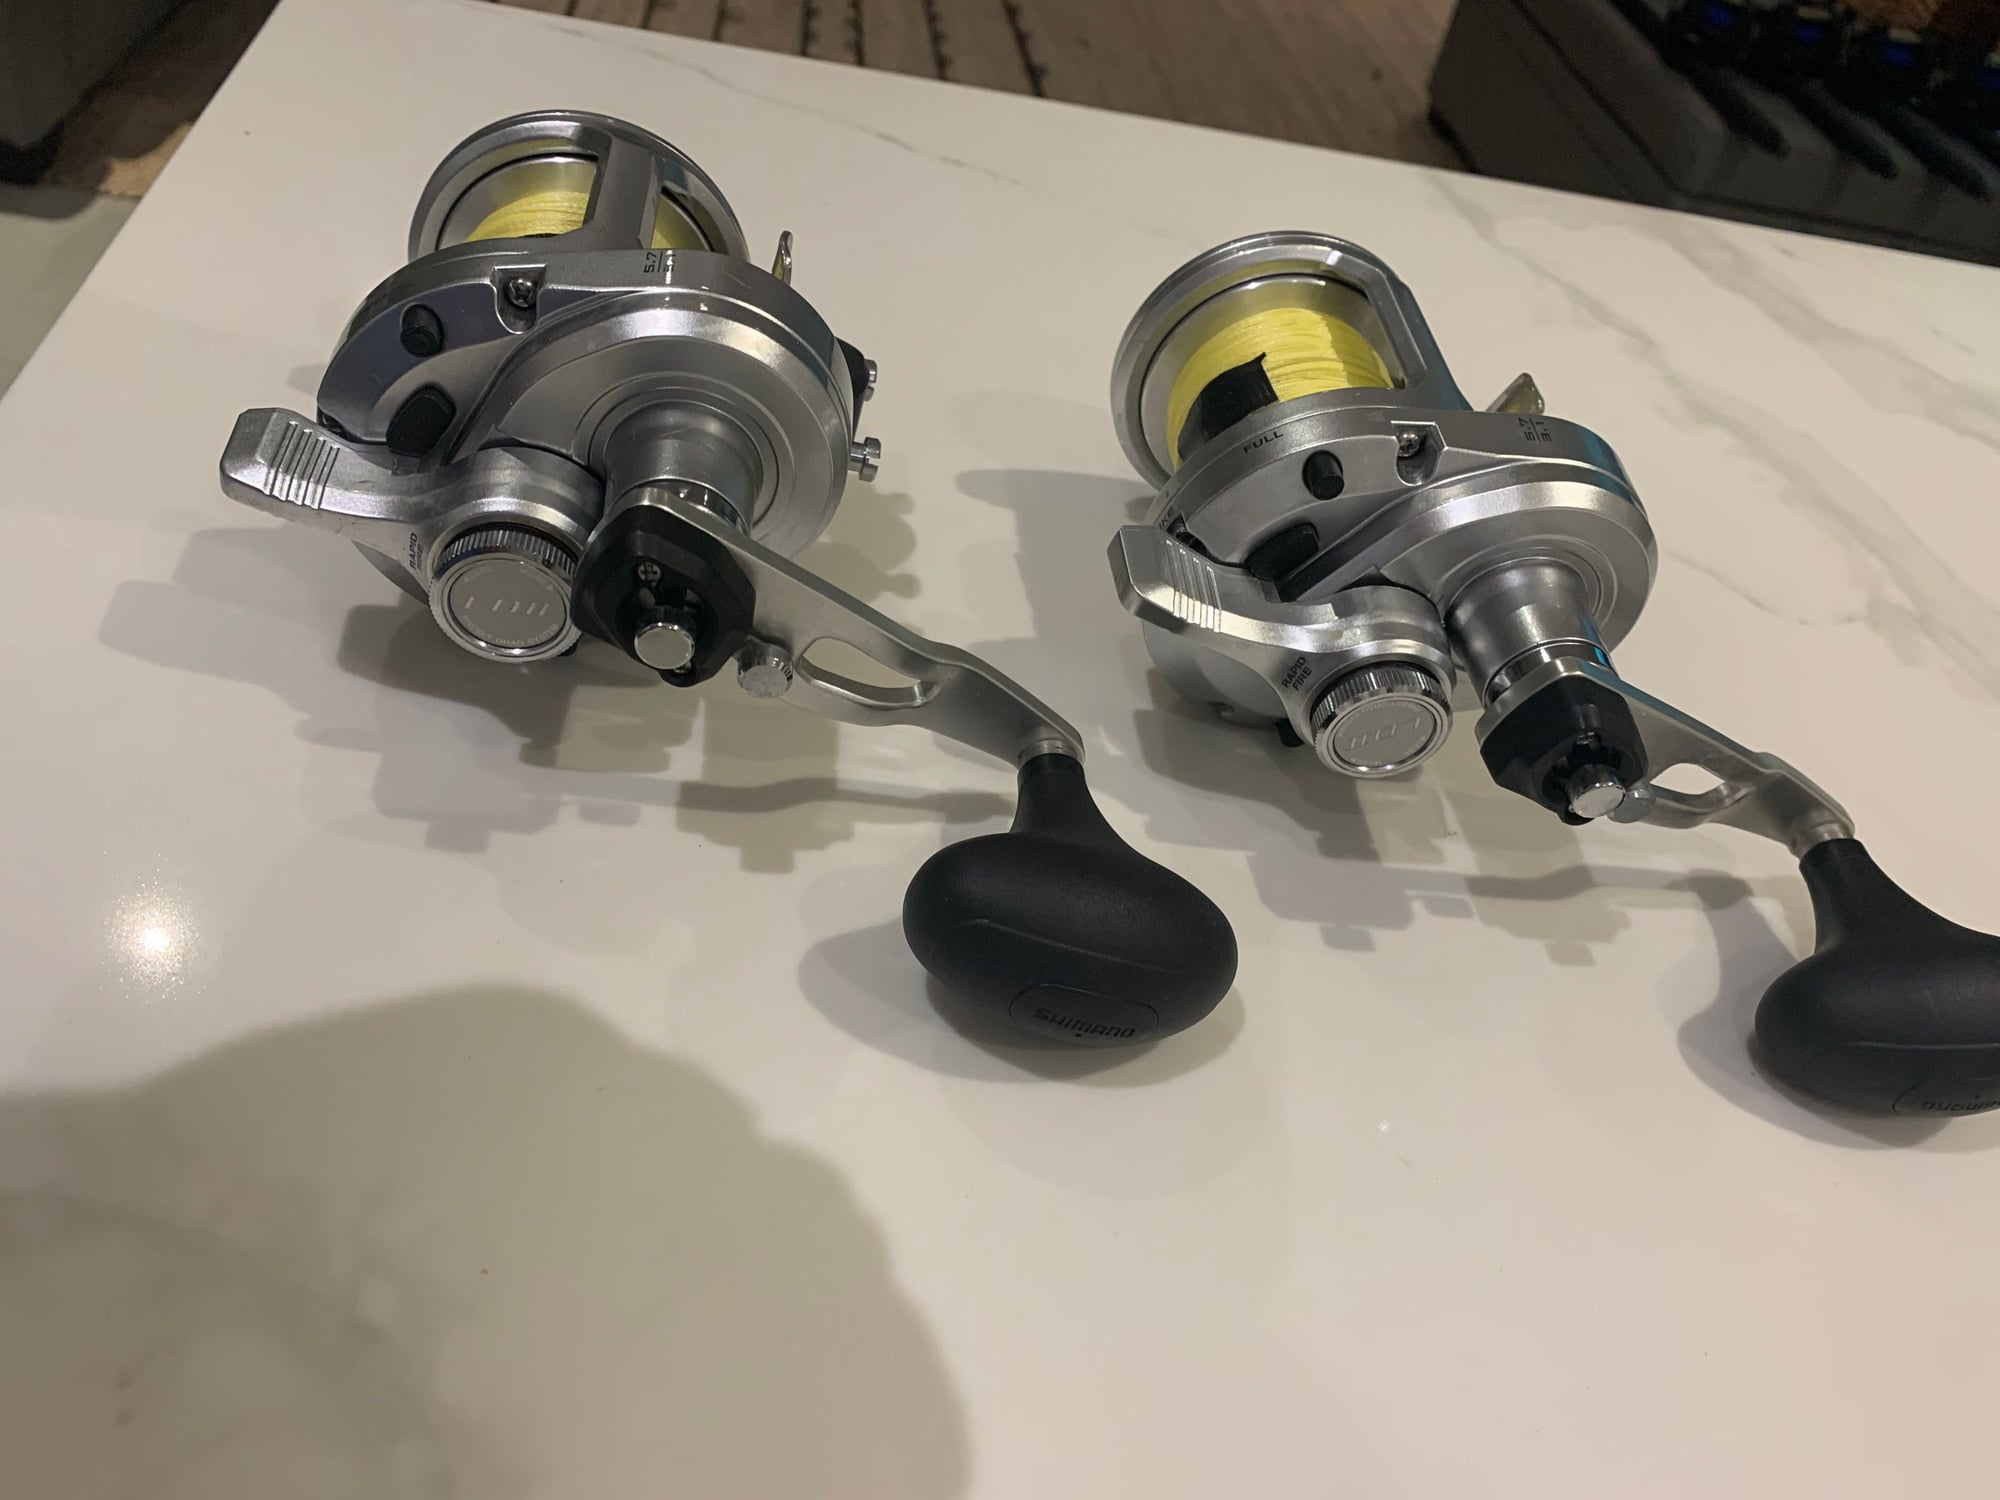 Shimano Speedmaster 16 2 speed x2 - The Hull Truth - Boating and Fishing  Forum